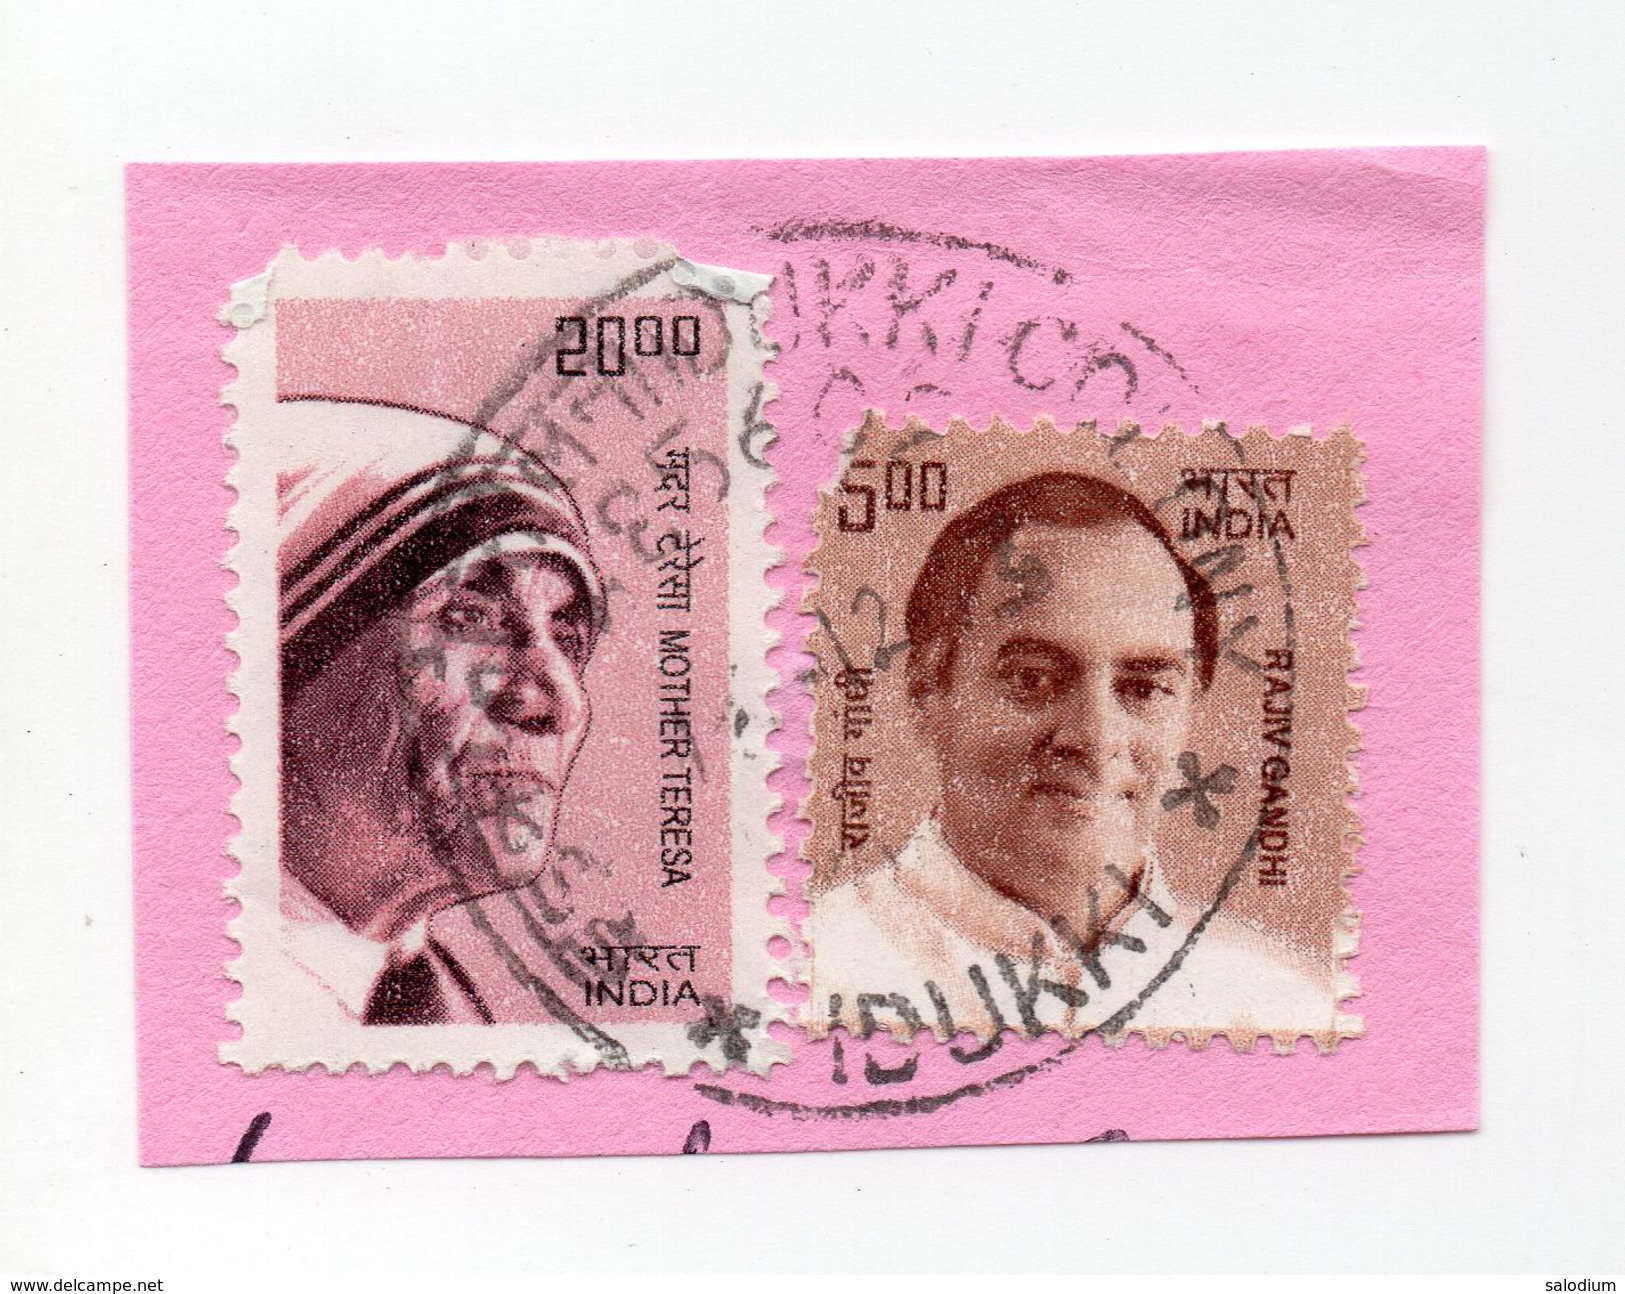 F2229 - Mother Teresa Of Calcutta - Gandhi - India - Used Stamps